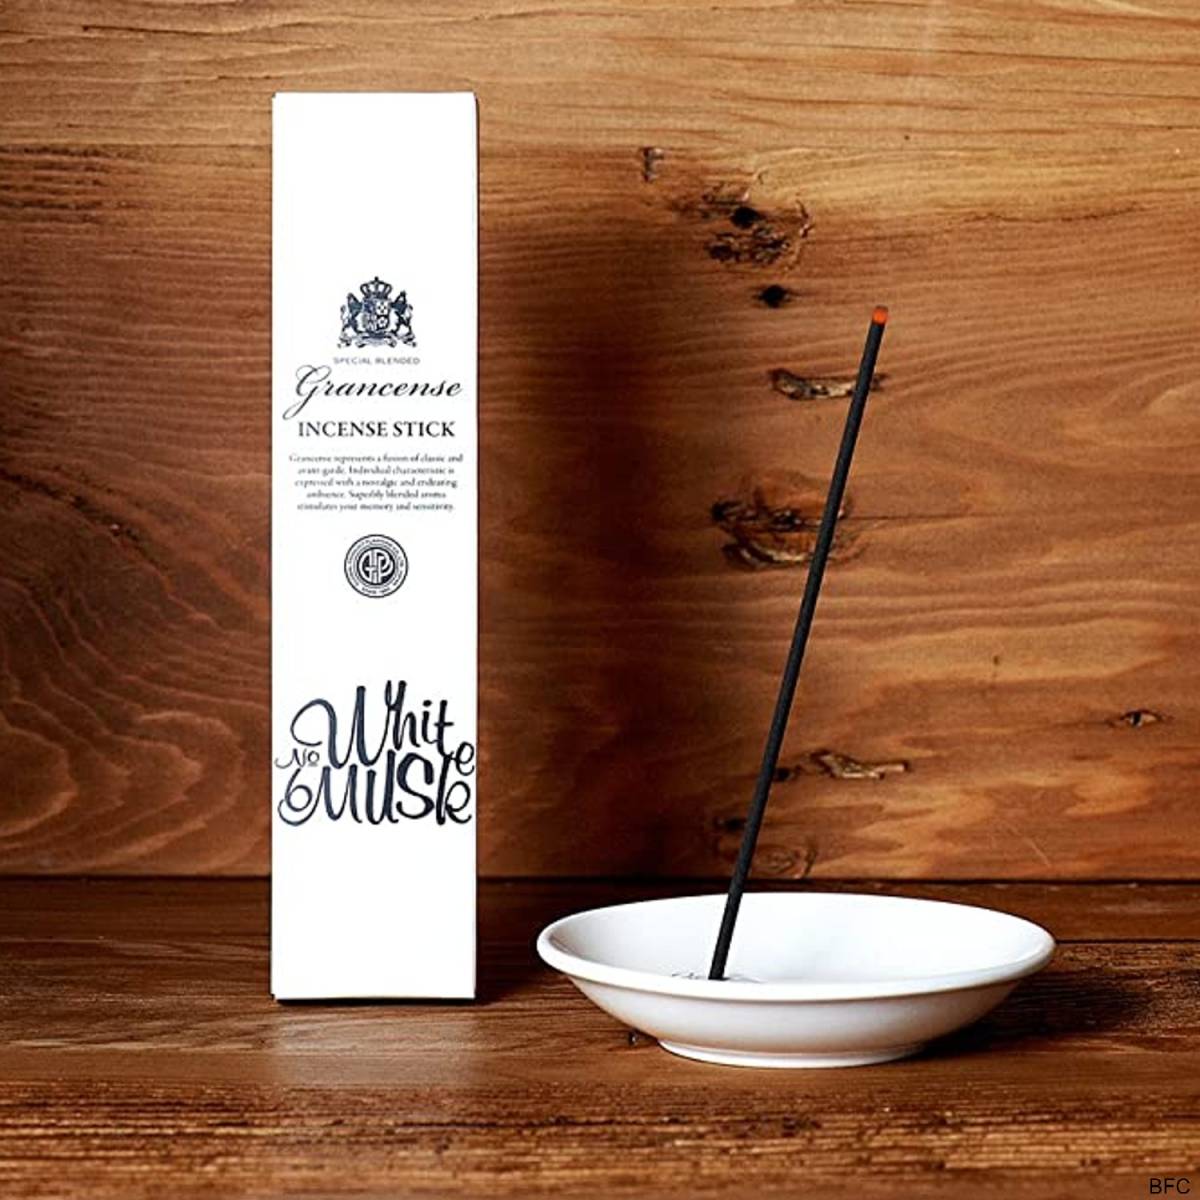  fragrance establish fragrance 1 kind attaching set Musk white white fragrance put stylish in sense holder s Tec censer . plate incense stick pcs washing with water possibility free shipping 